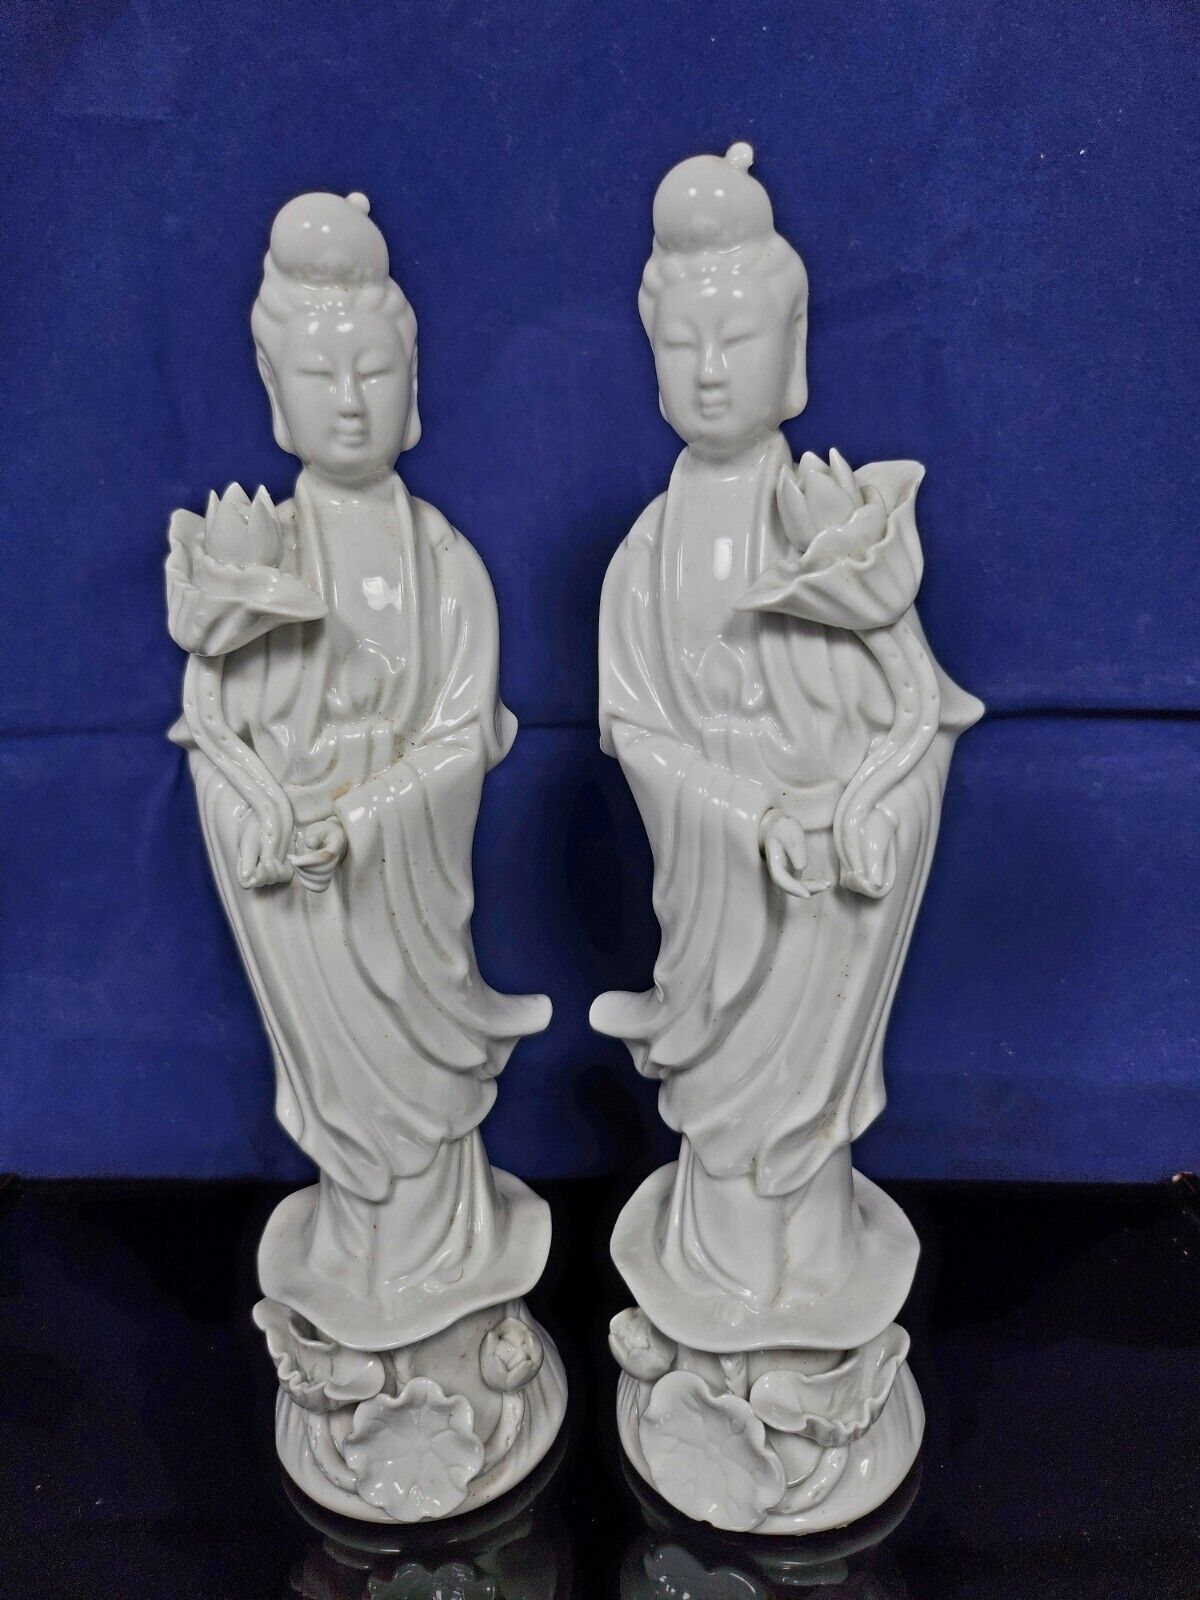 Late 19th century - early 20th century, Dehua white porcelain Guanyin, China [a 